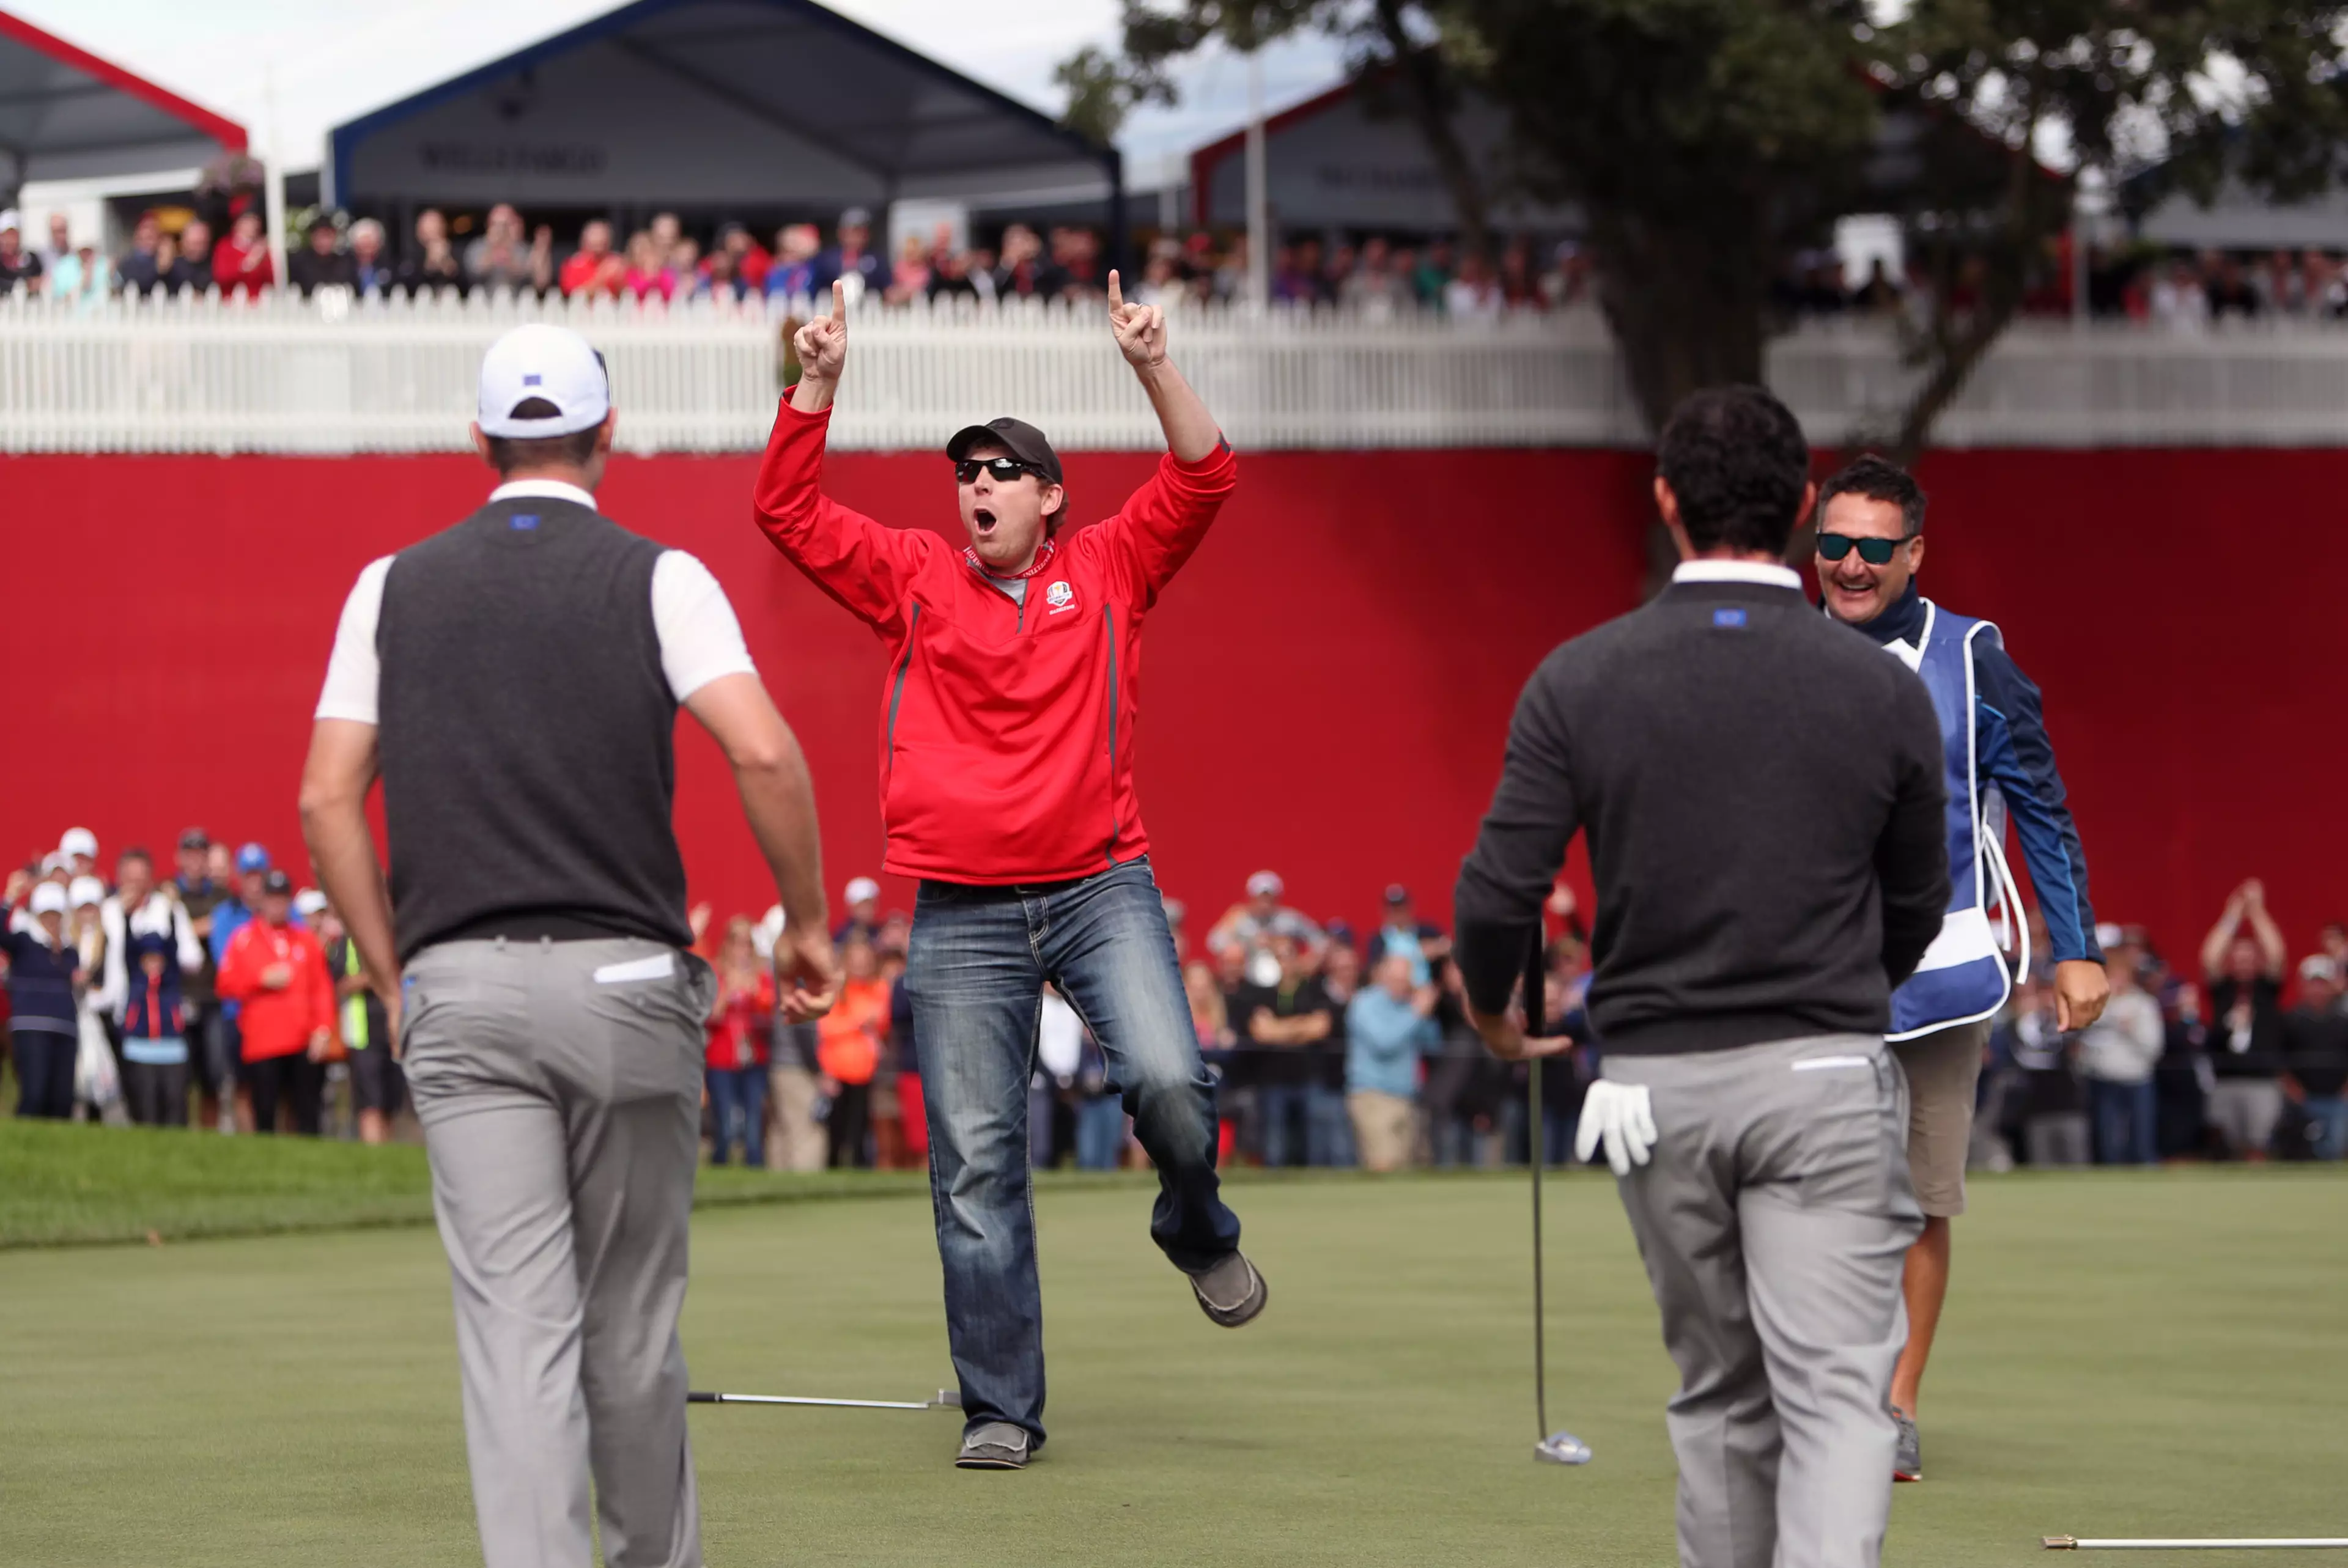 WATCH: Heckling Fan Wins $100 From Justin Rose With Brilliant Putt